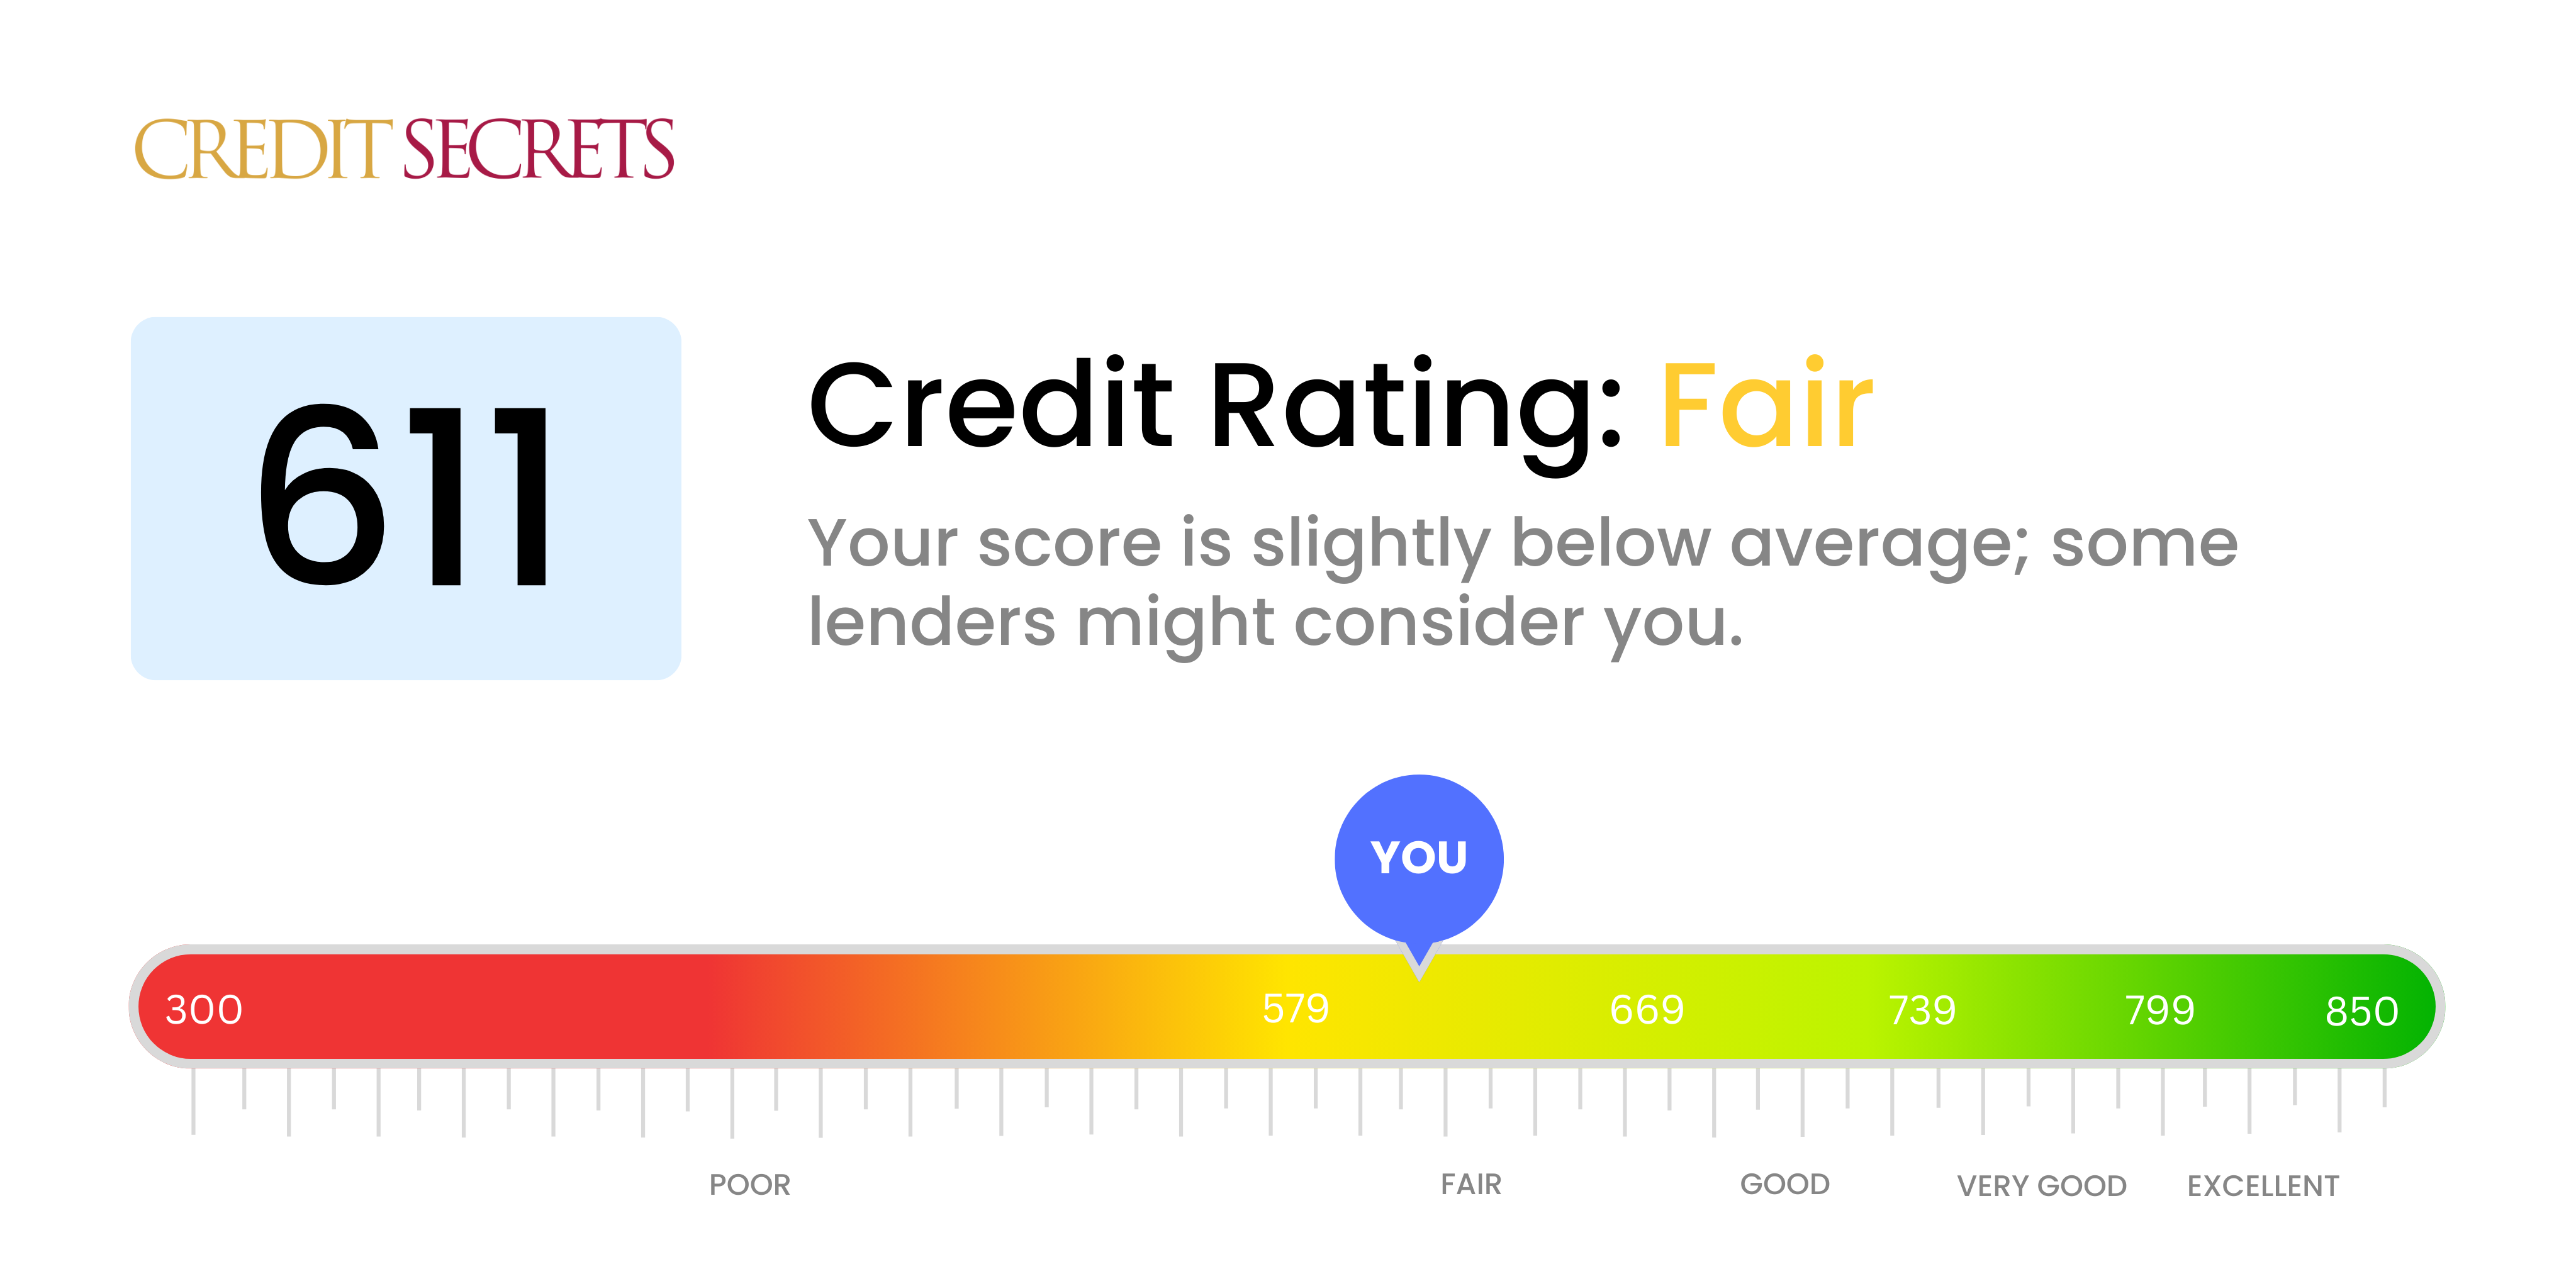 Is 611 a good credit score?